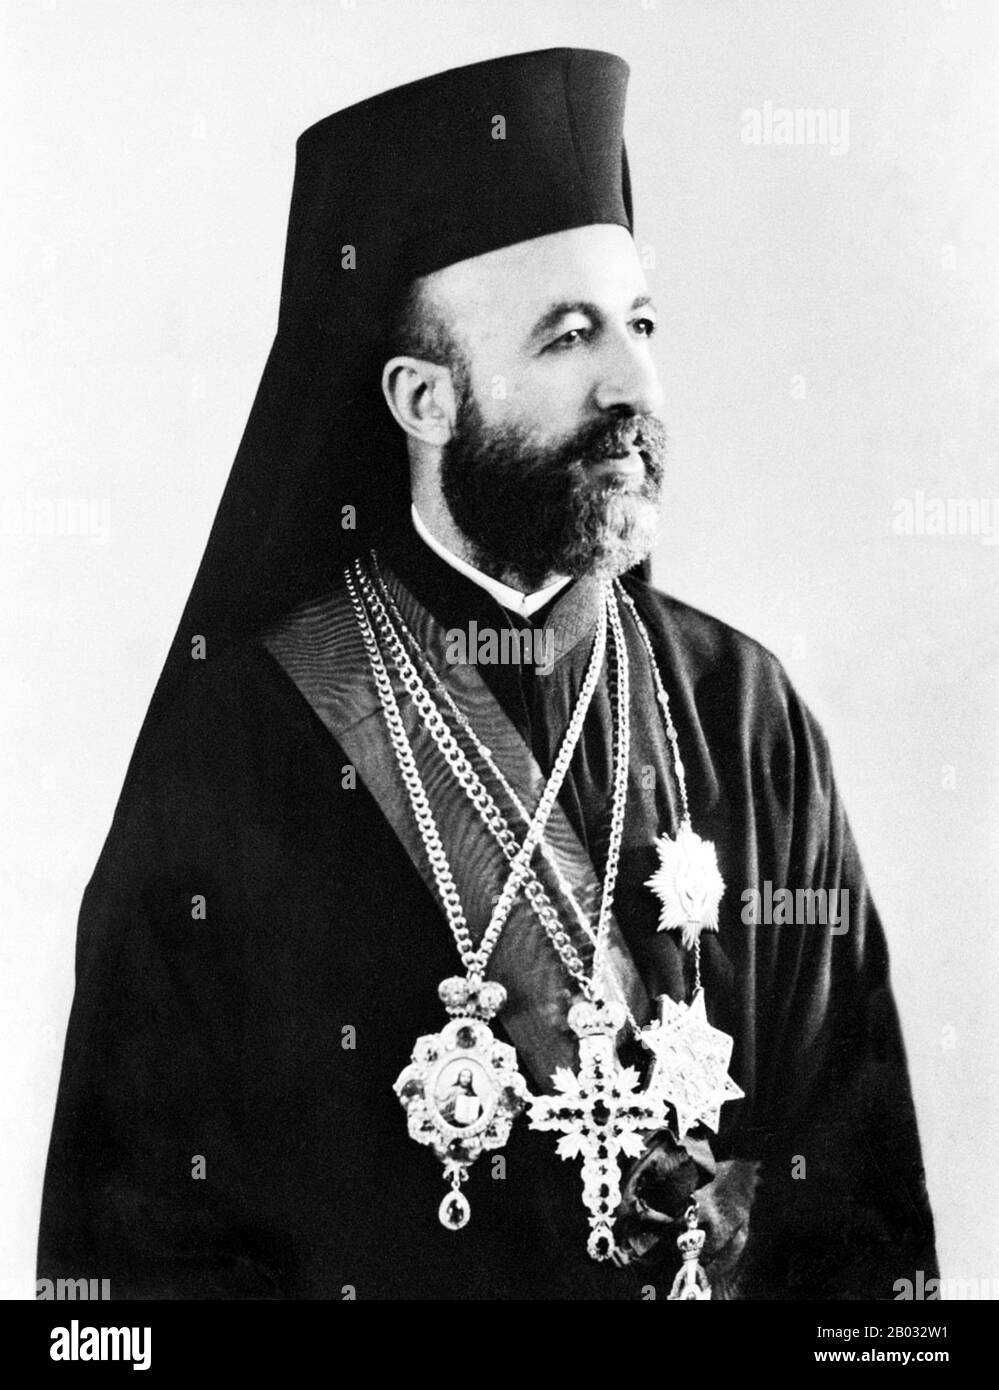 Makarios III, born Michail Christodoulou Mouskos (August 13, 1913 – August 3, 1977), was the archbishop and primate of the autocephalous Church of Cyprus, a Greek Orthodox Church (1950–1977), and the first President of the Republic of Cyprus (1960–1974 and 1974–1977).  In his three terms as President of Cyprus (1960–1977), he survived four assassination attempts and a 1974 coup. Stock Photo